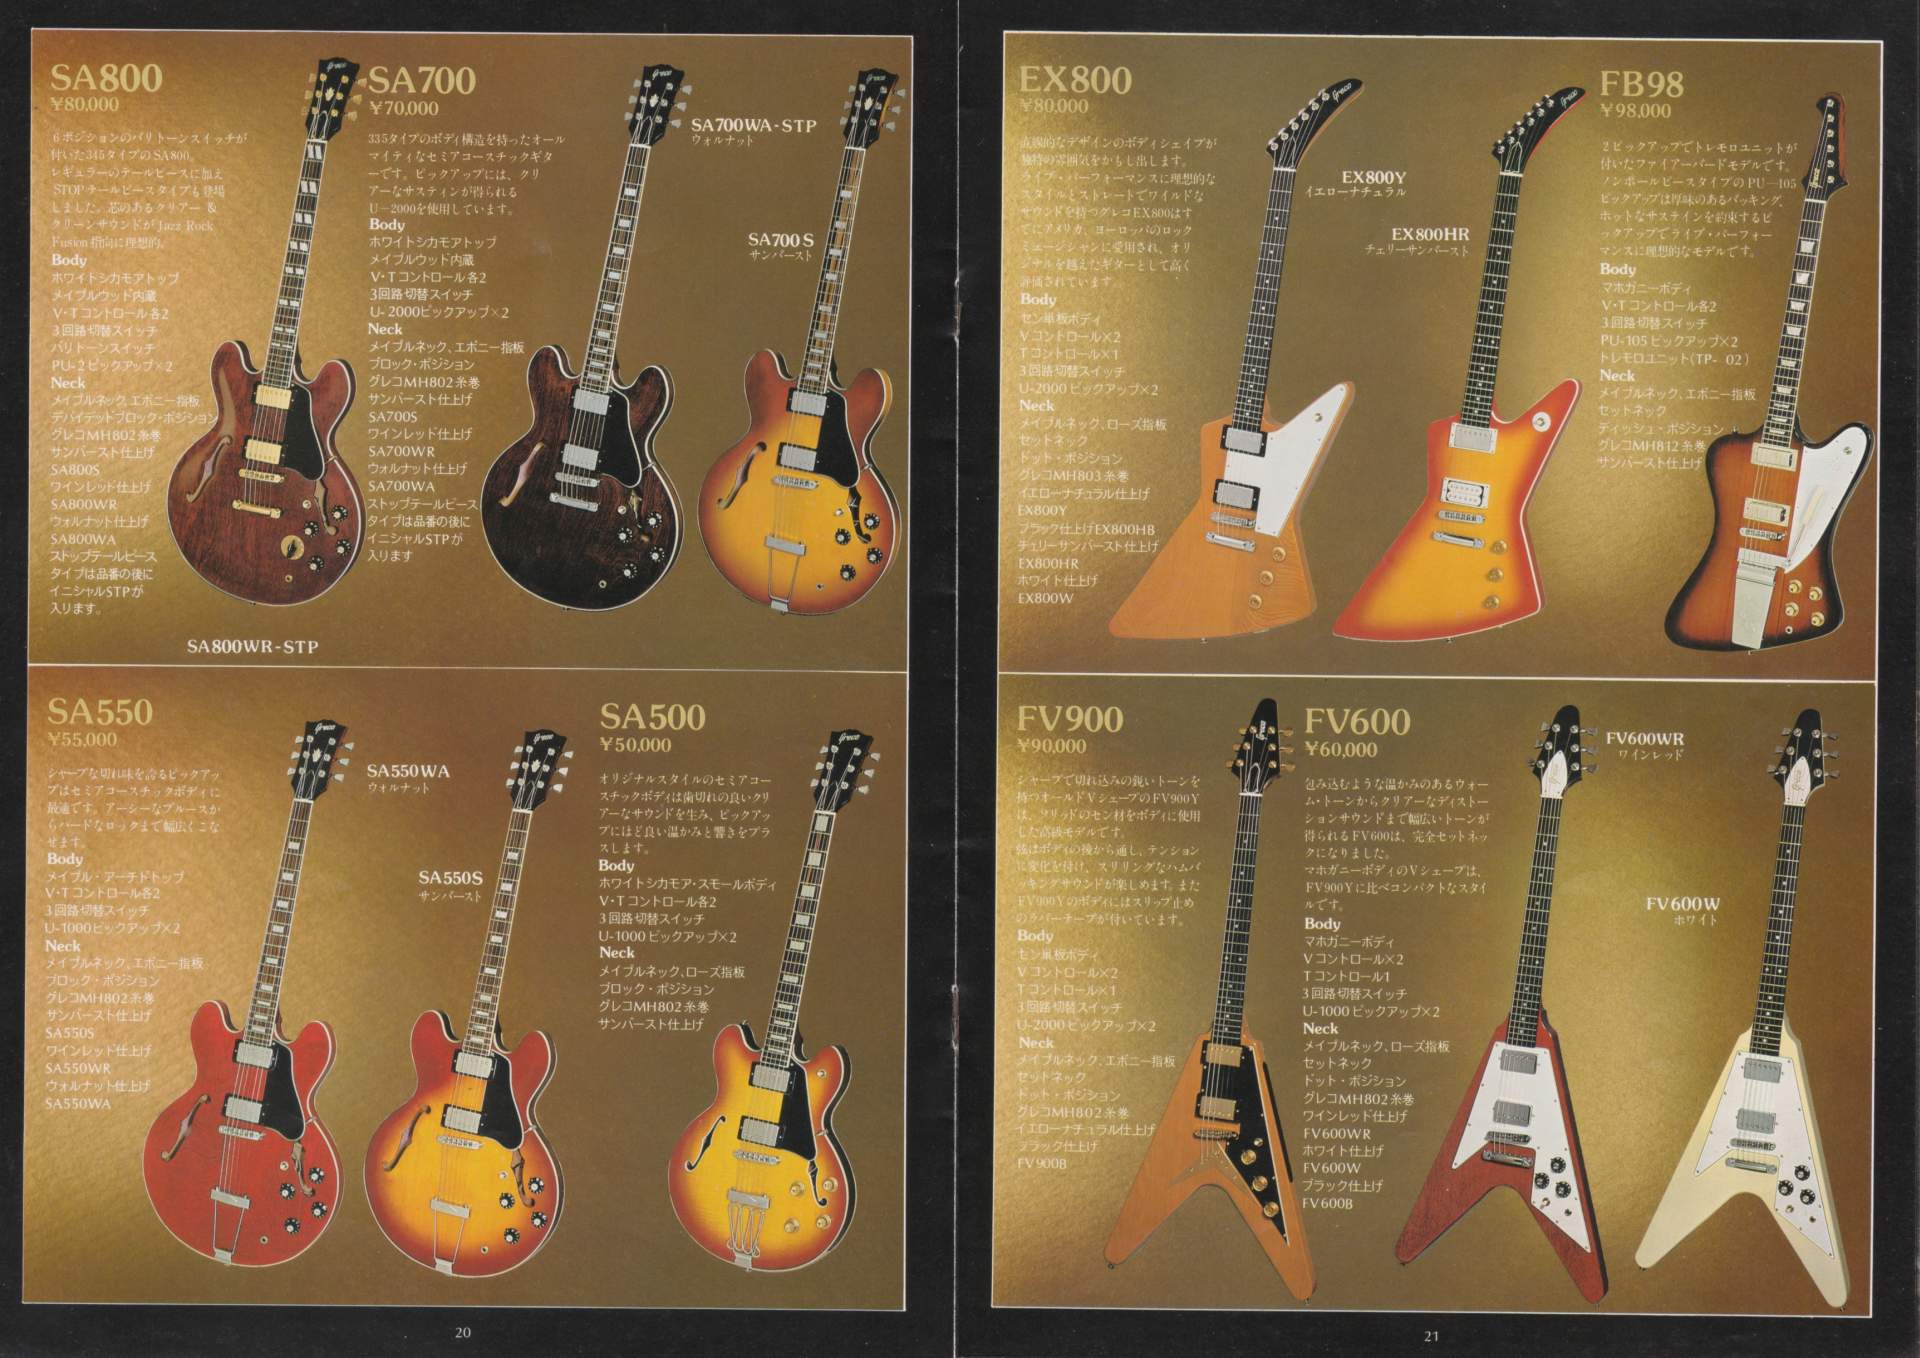 The World of Musical Instruments Brochures - Greco Guitar Catalog 